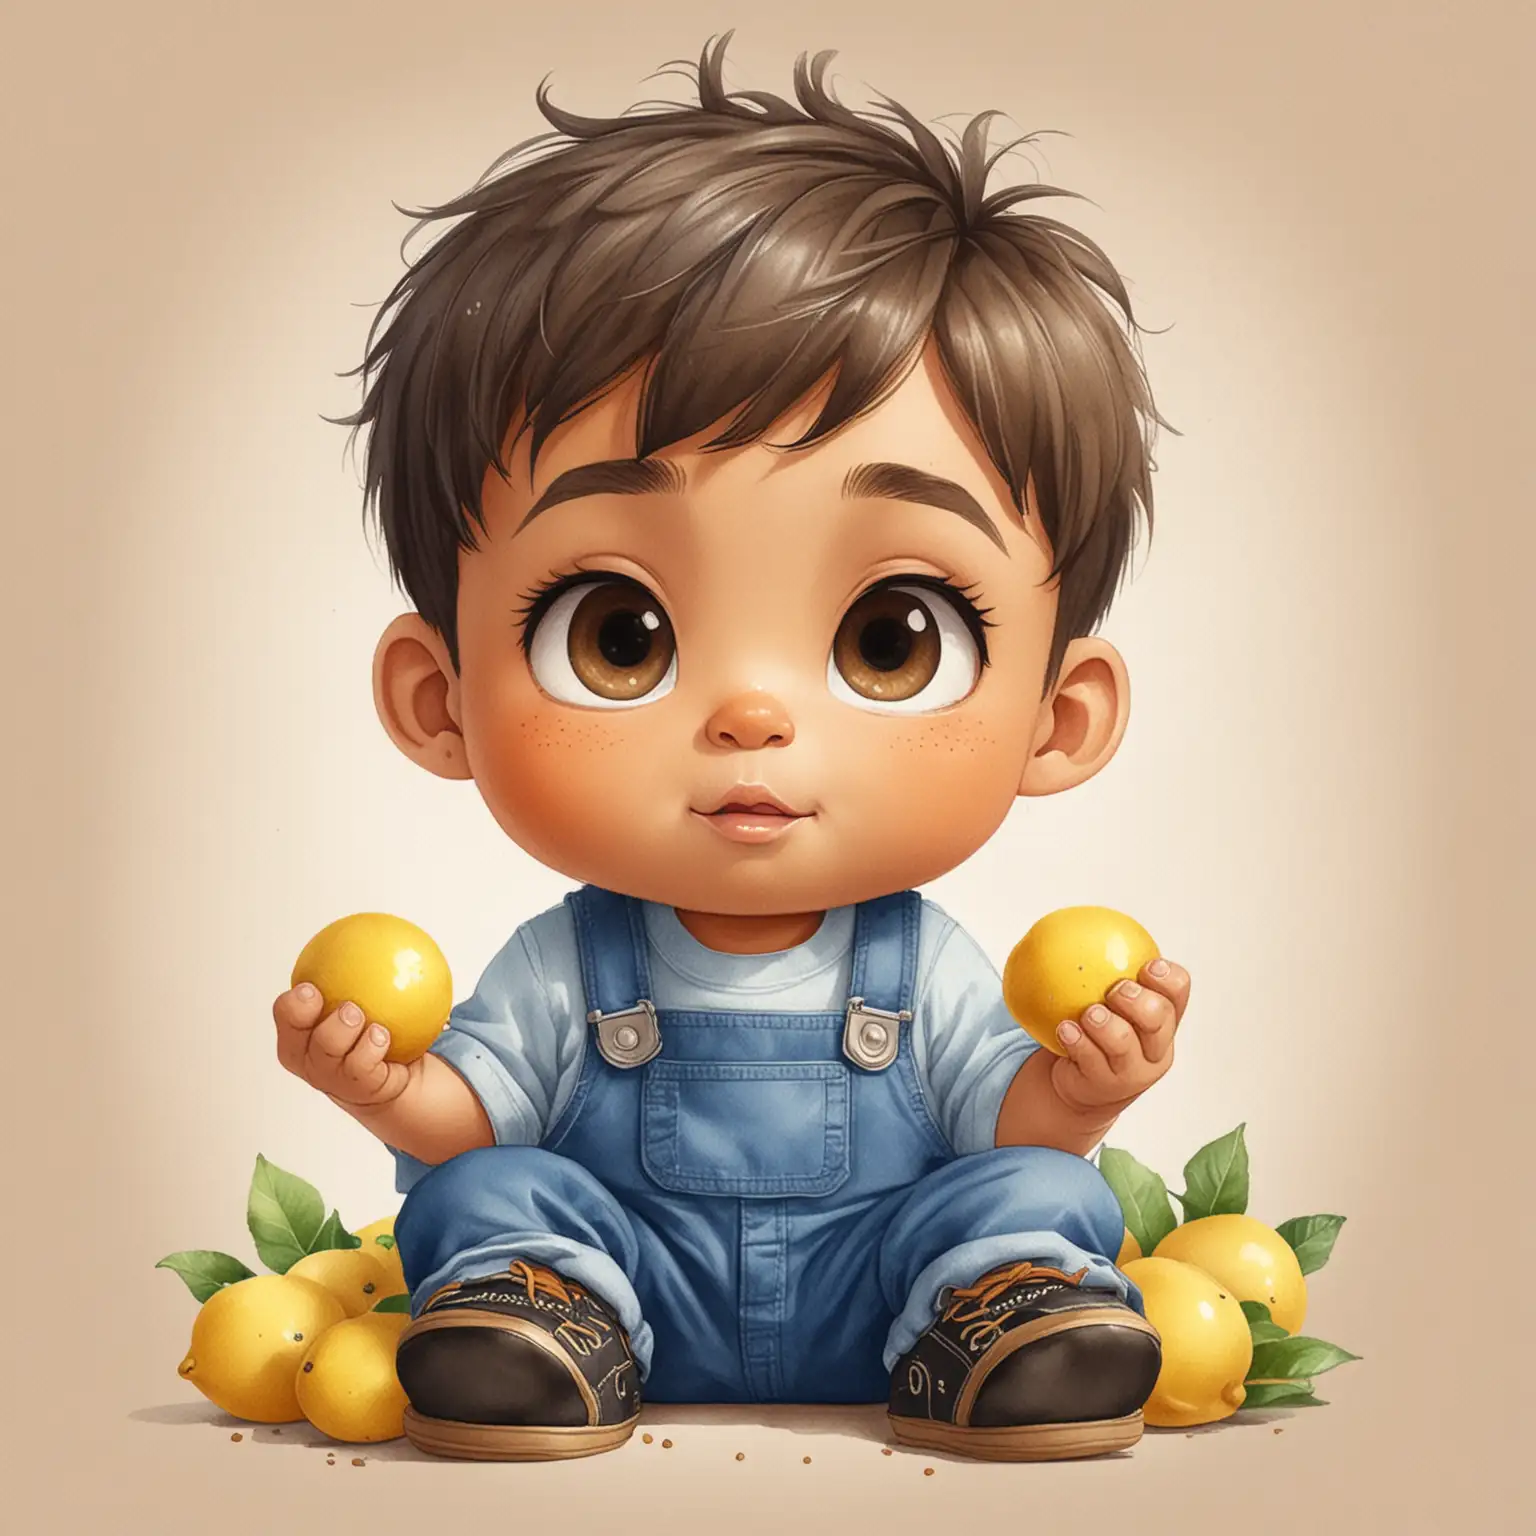 Create a watercolor illustration of a chibi cartoon tan skin Hispanic boy baby. He is wearing a blue shirt and blue overalls with black shoes and sitting down holding lemons in his hands. Brown eyes. Extremely highly detailed brown short hair. White background